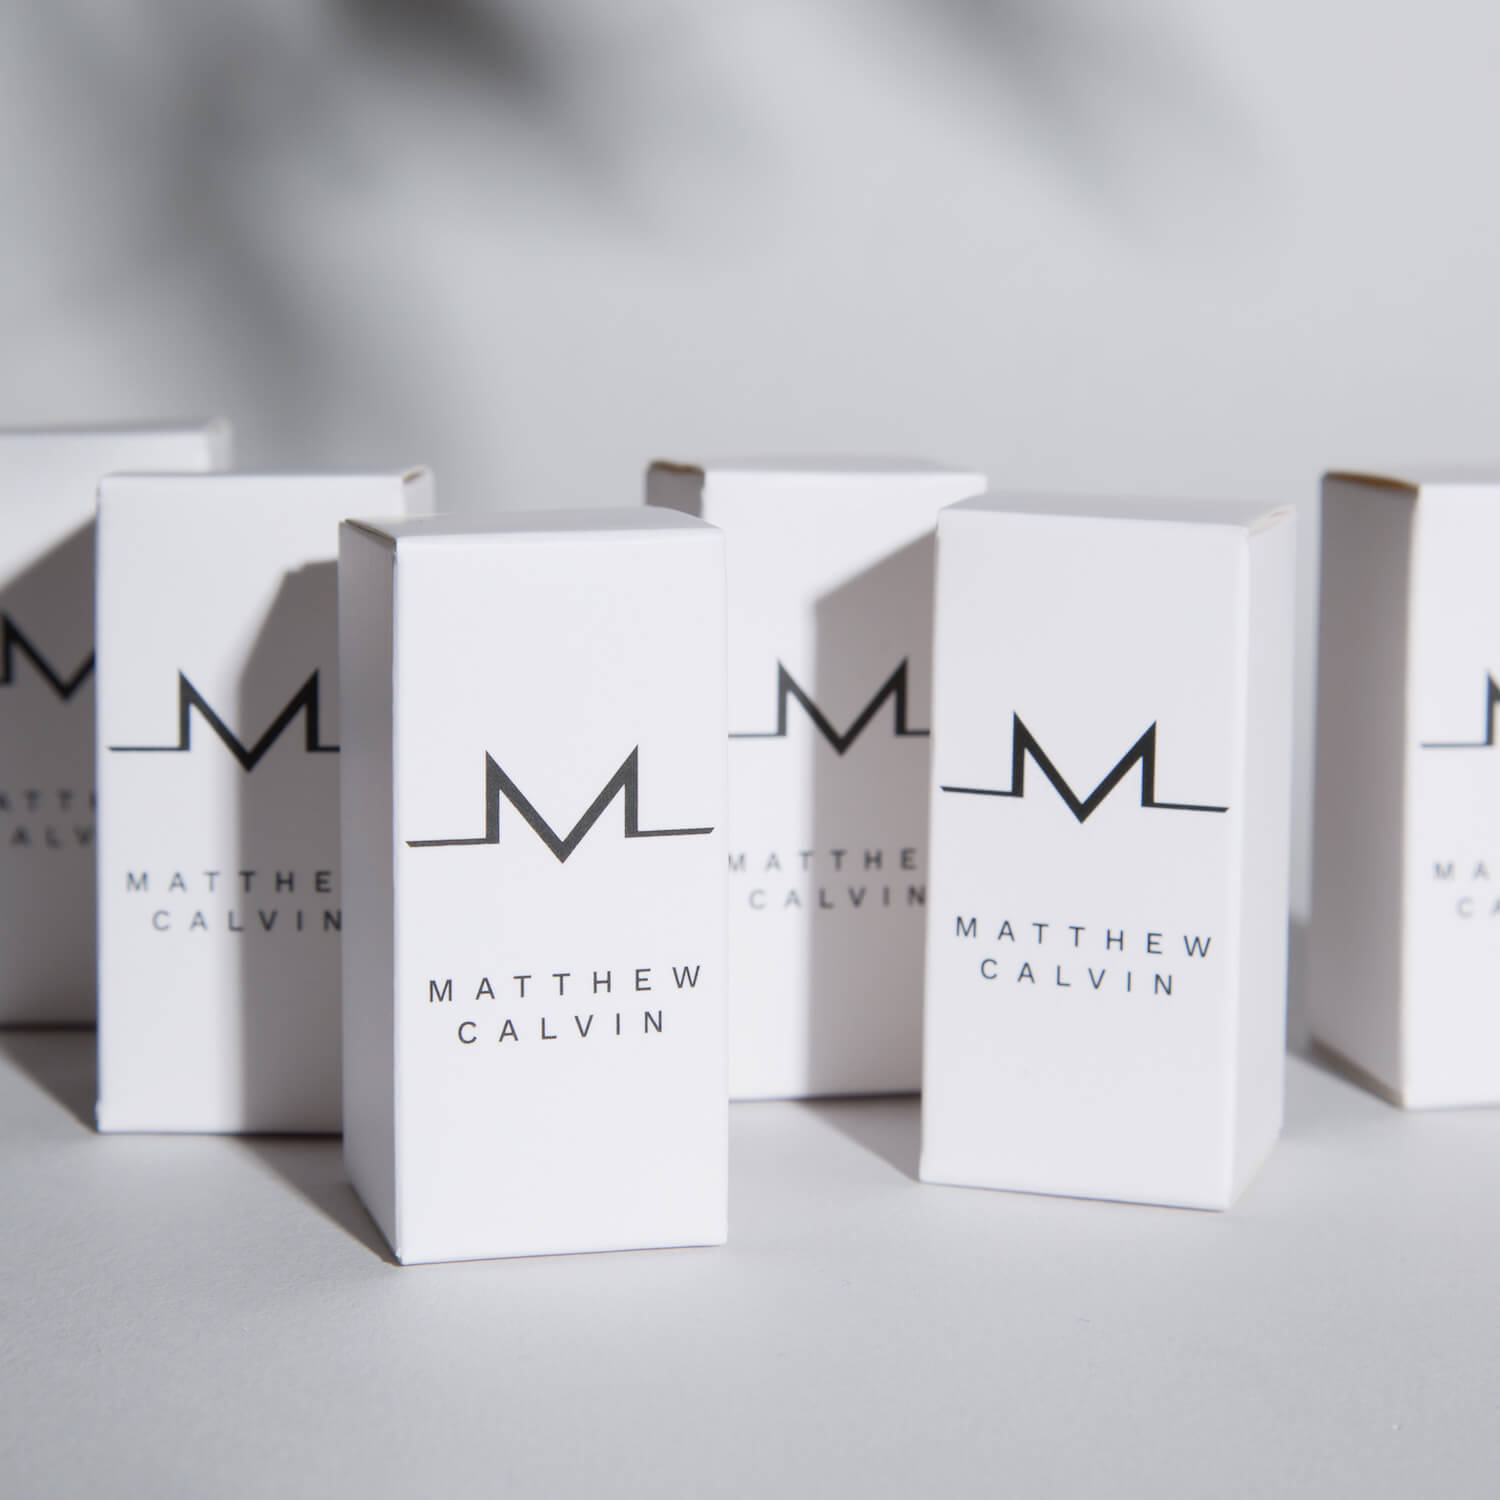 White boxes with Matthew Calvin and an M logo on them